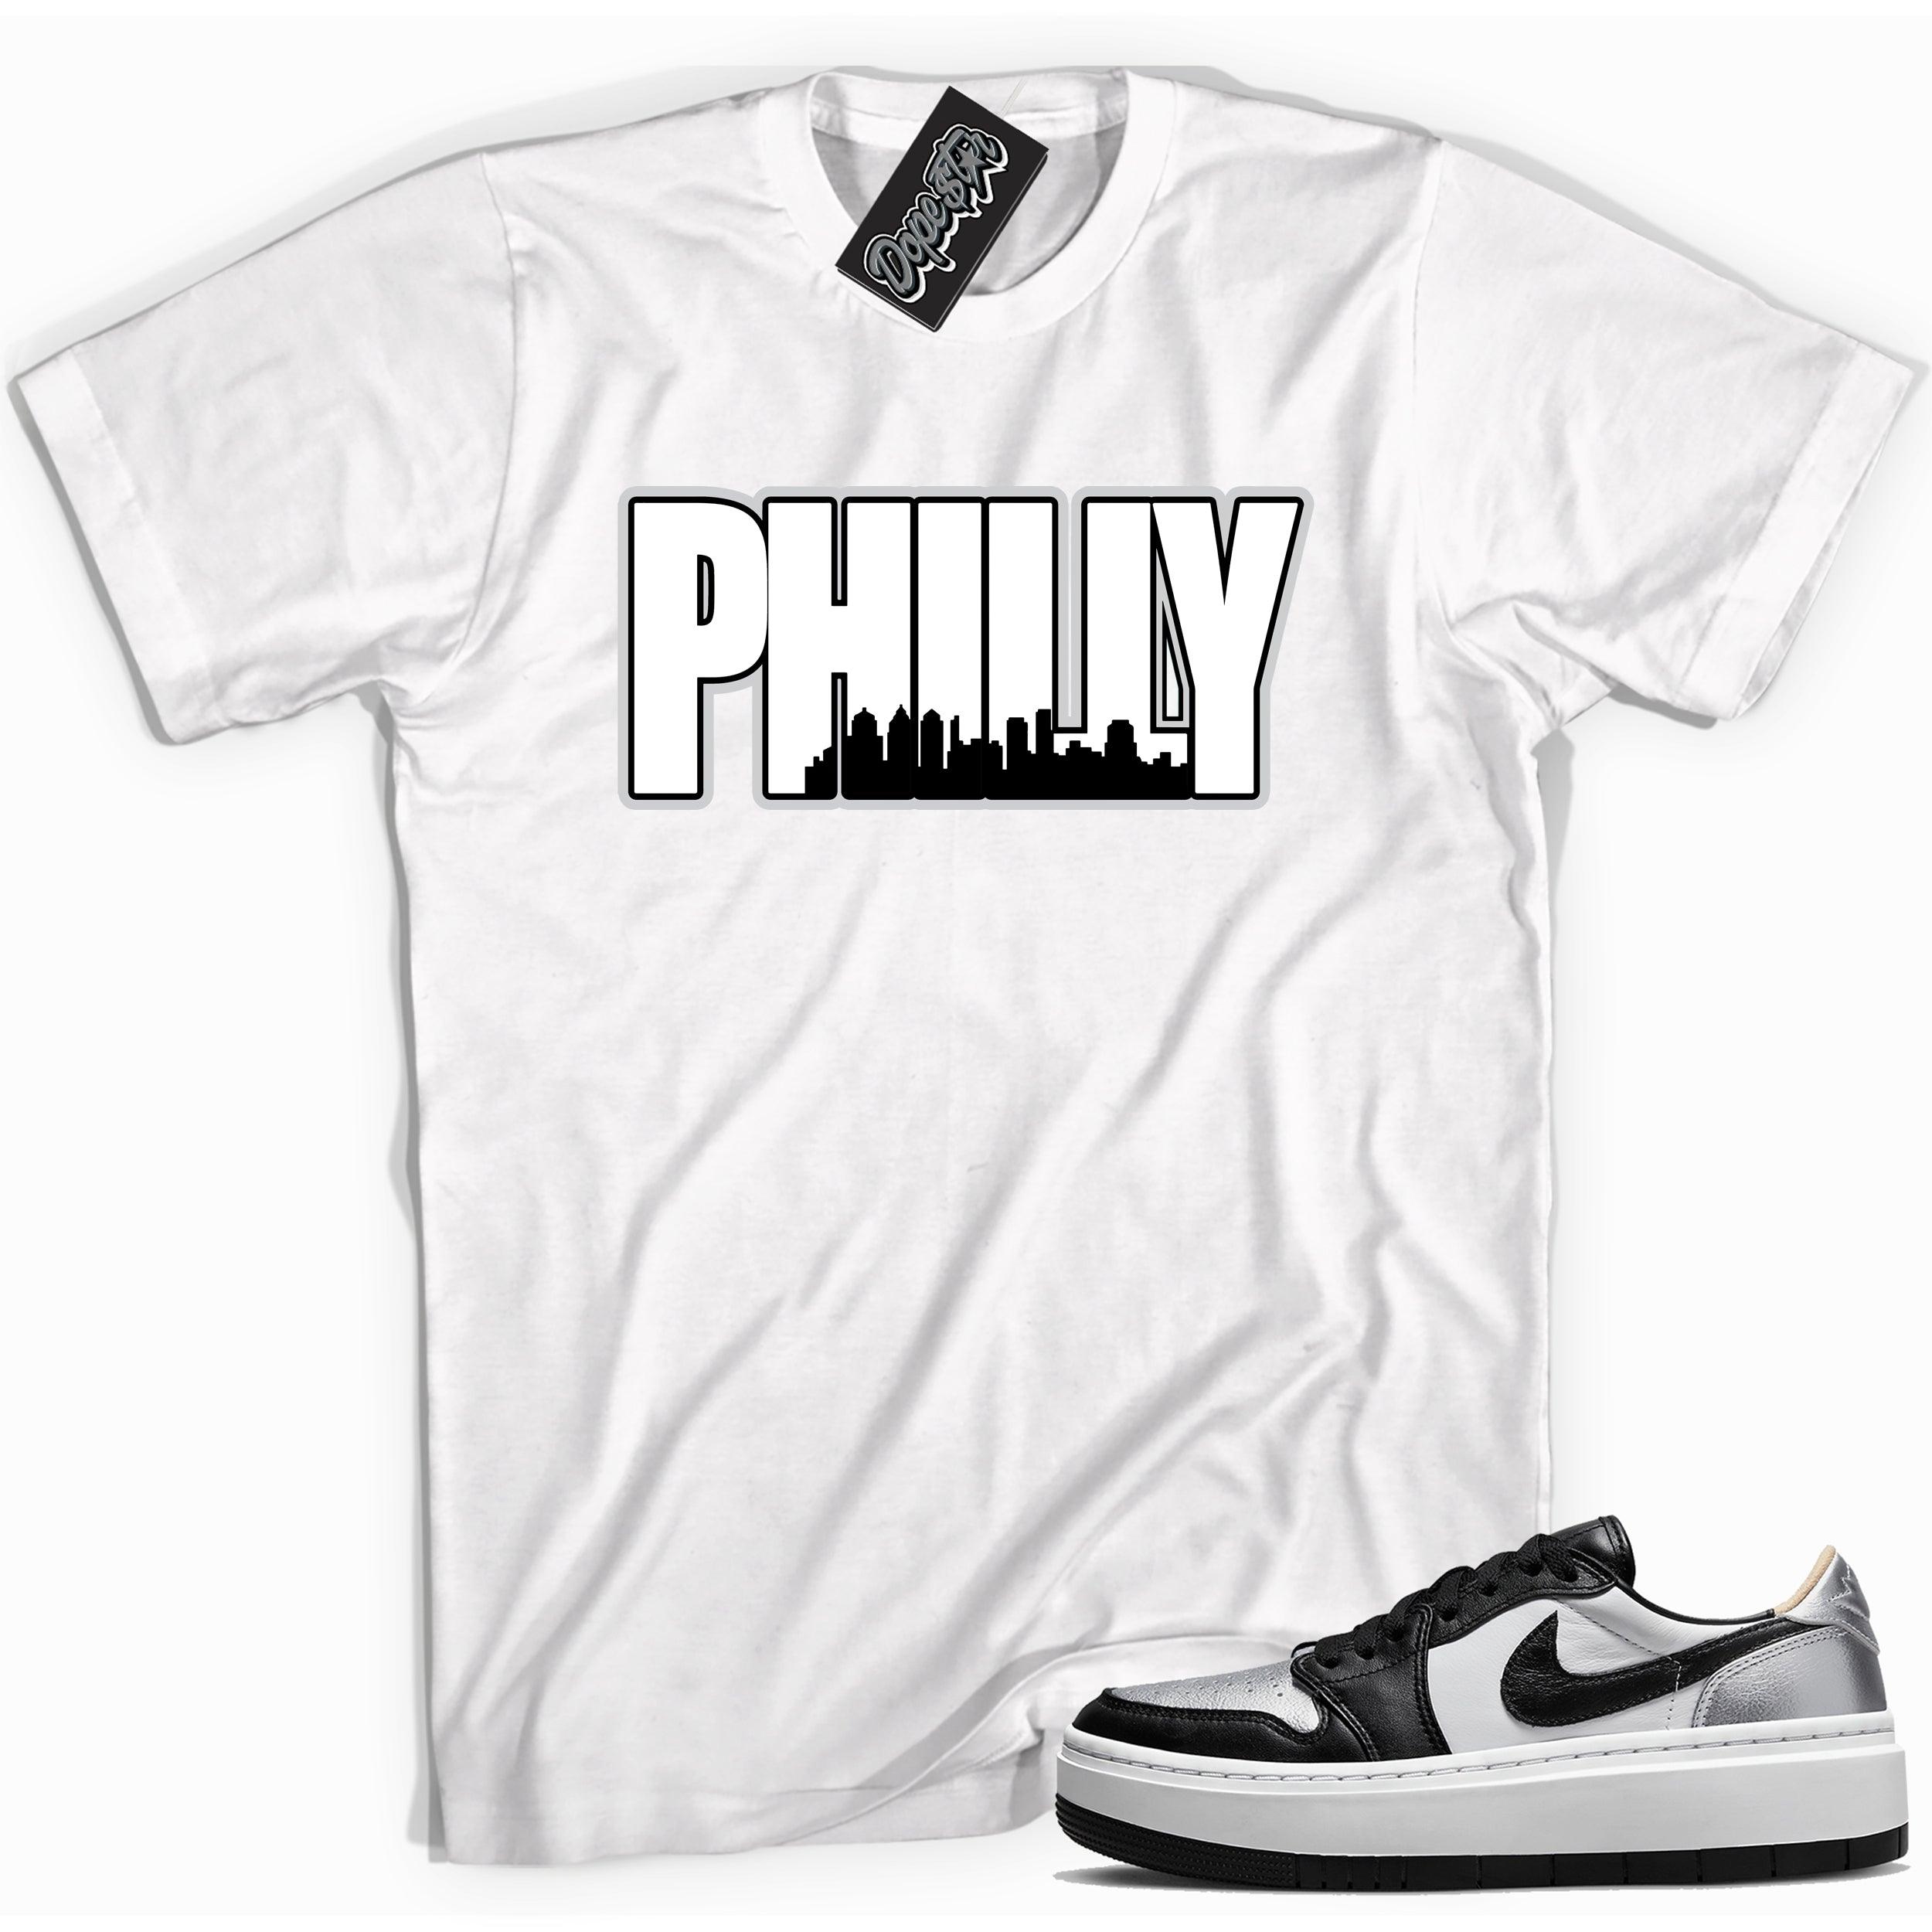 Cool white graphic tee with 'philly Philadelphia ' print, that perfectly matches Air Jordan 1 Elevate Low SE Silver Toe sneakers.